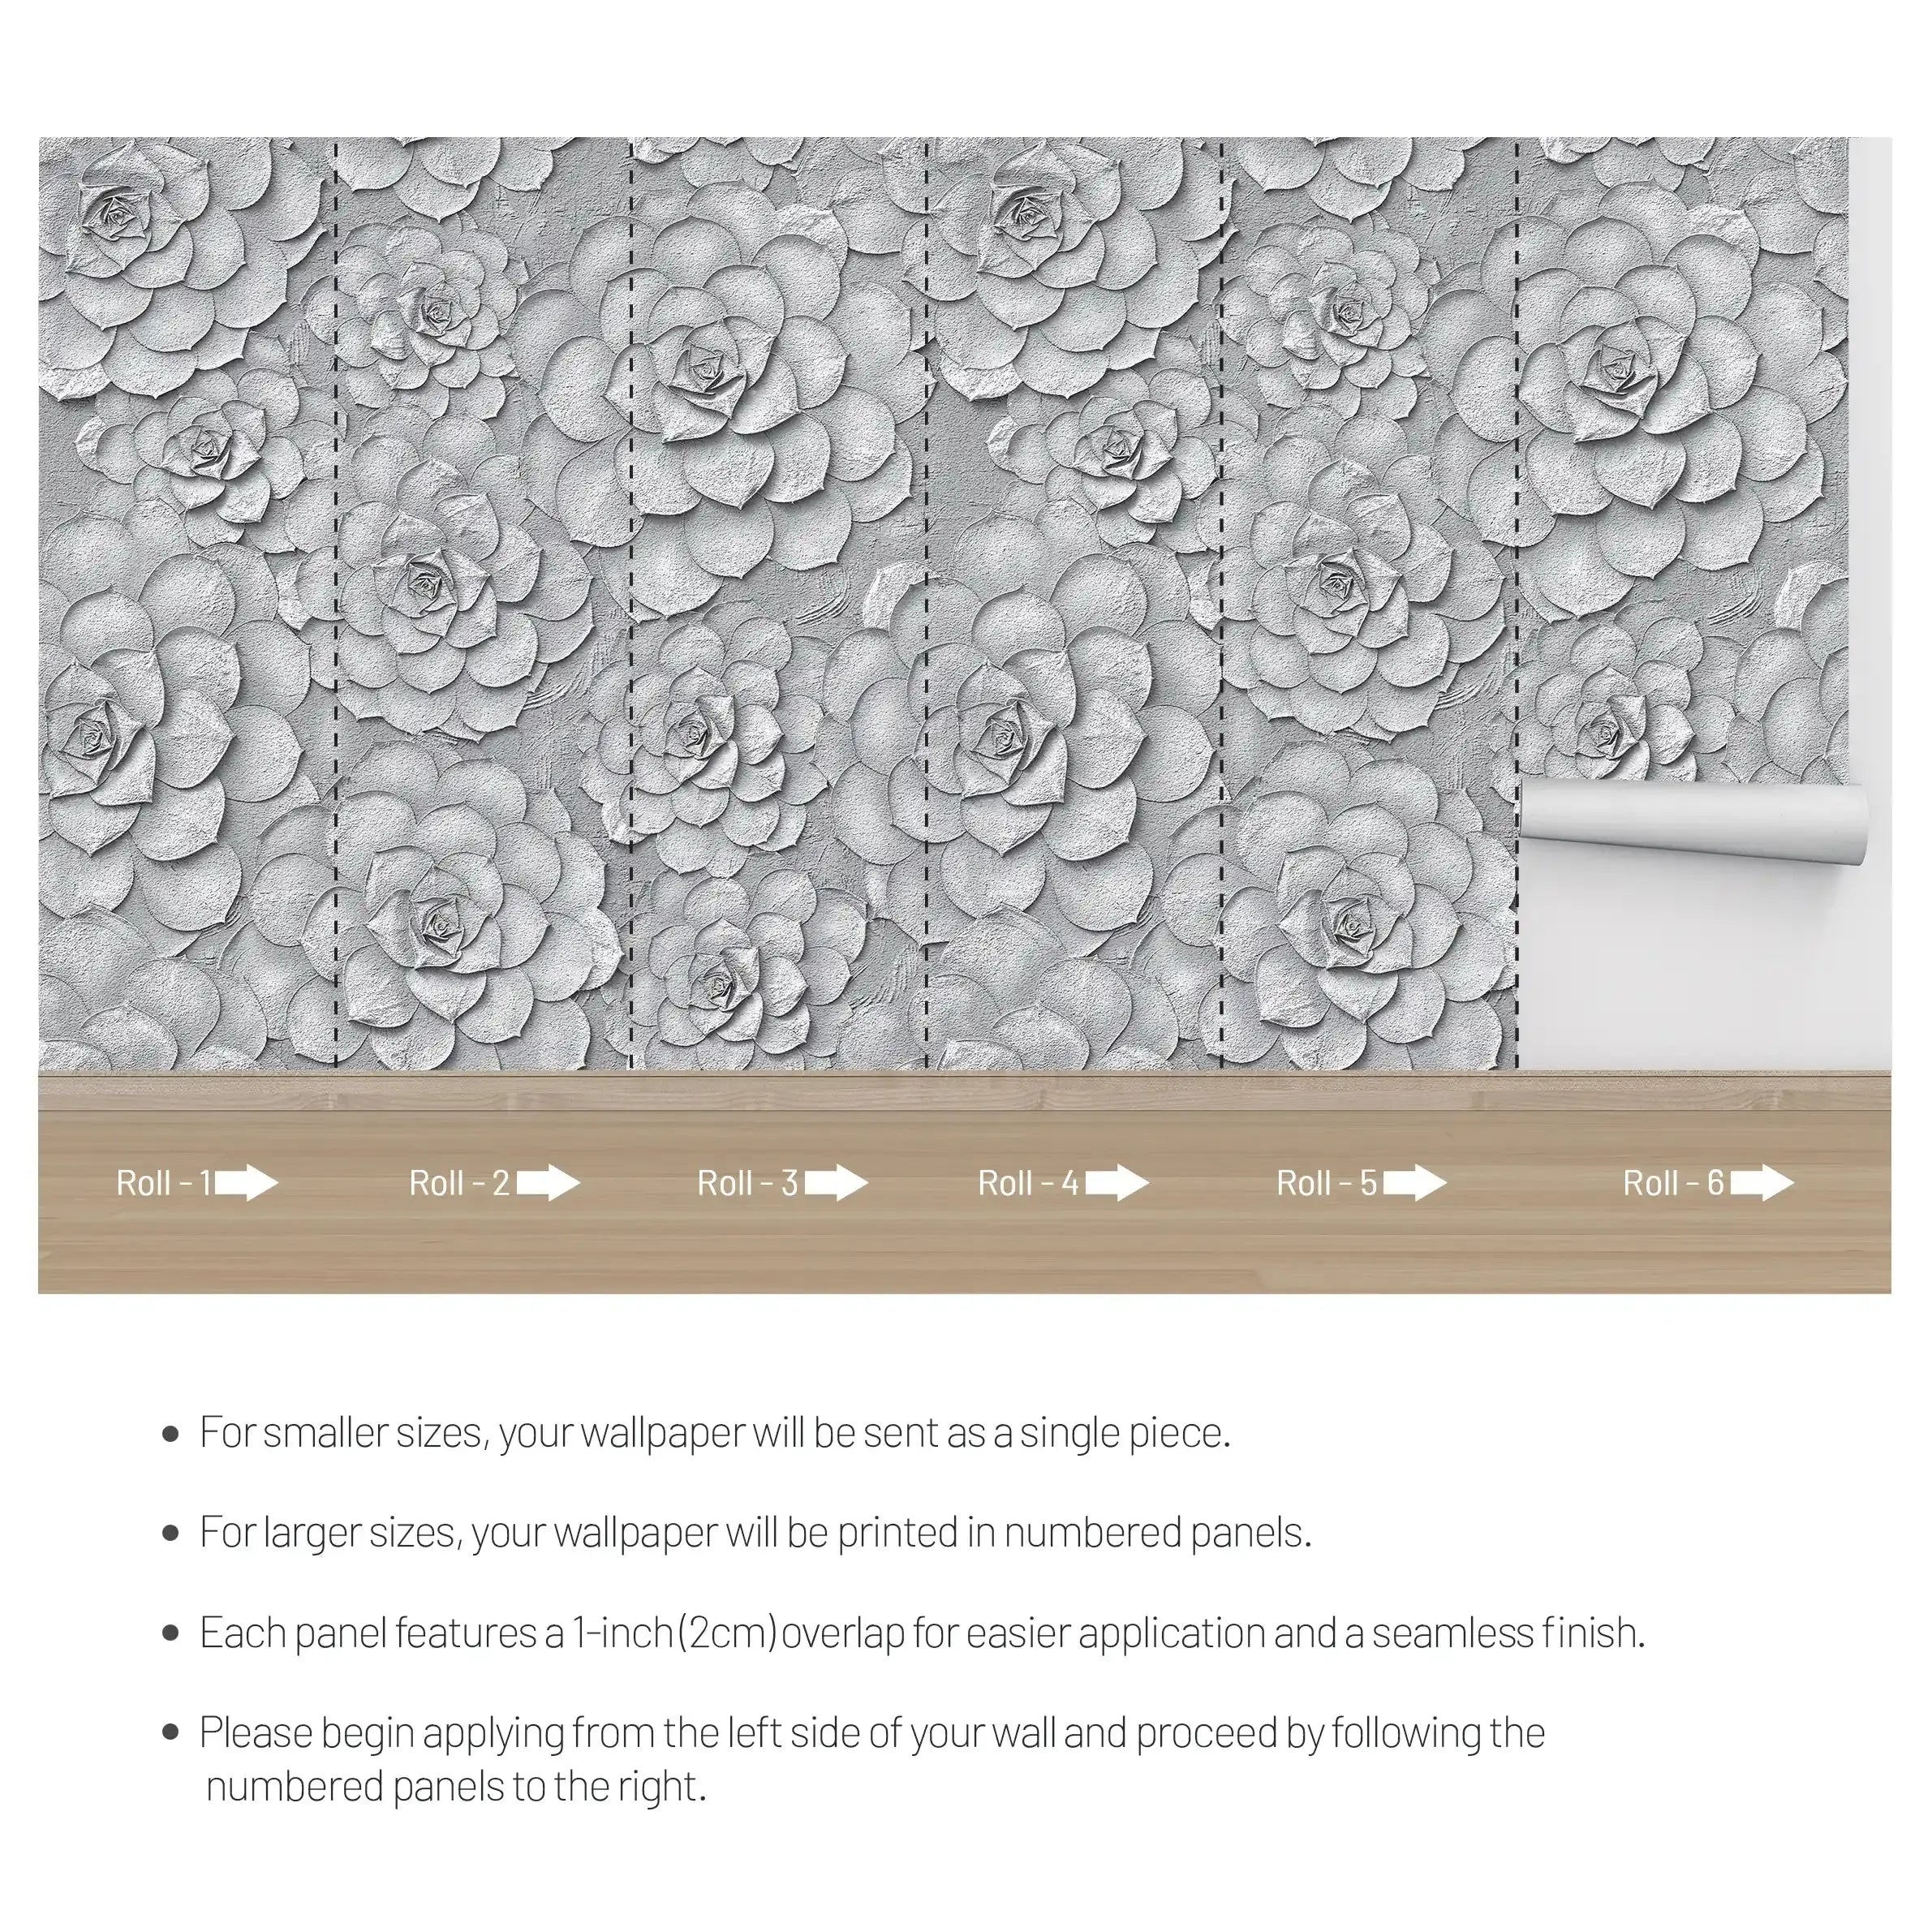 3012-A / Peel and Stick Wallpaper: Grey Rose and White Floral, Easy Install, Self Adhesive Wall Paper for Any Room - Artevella